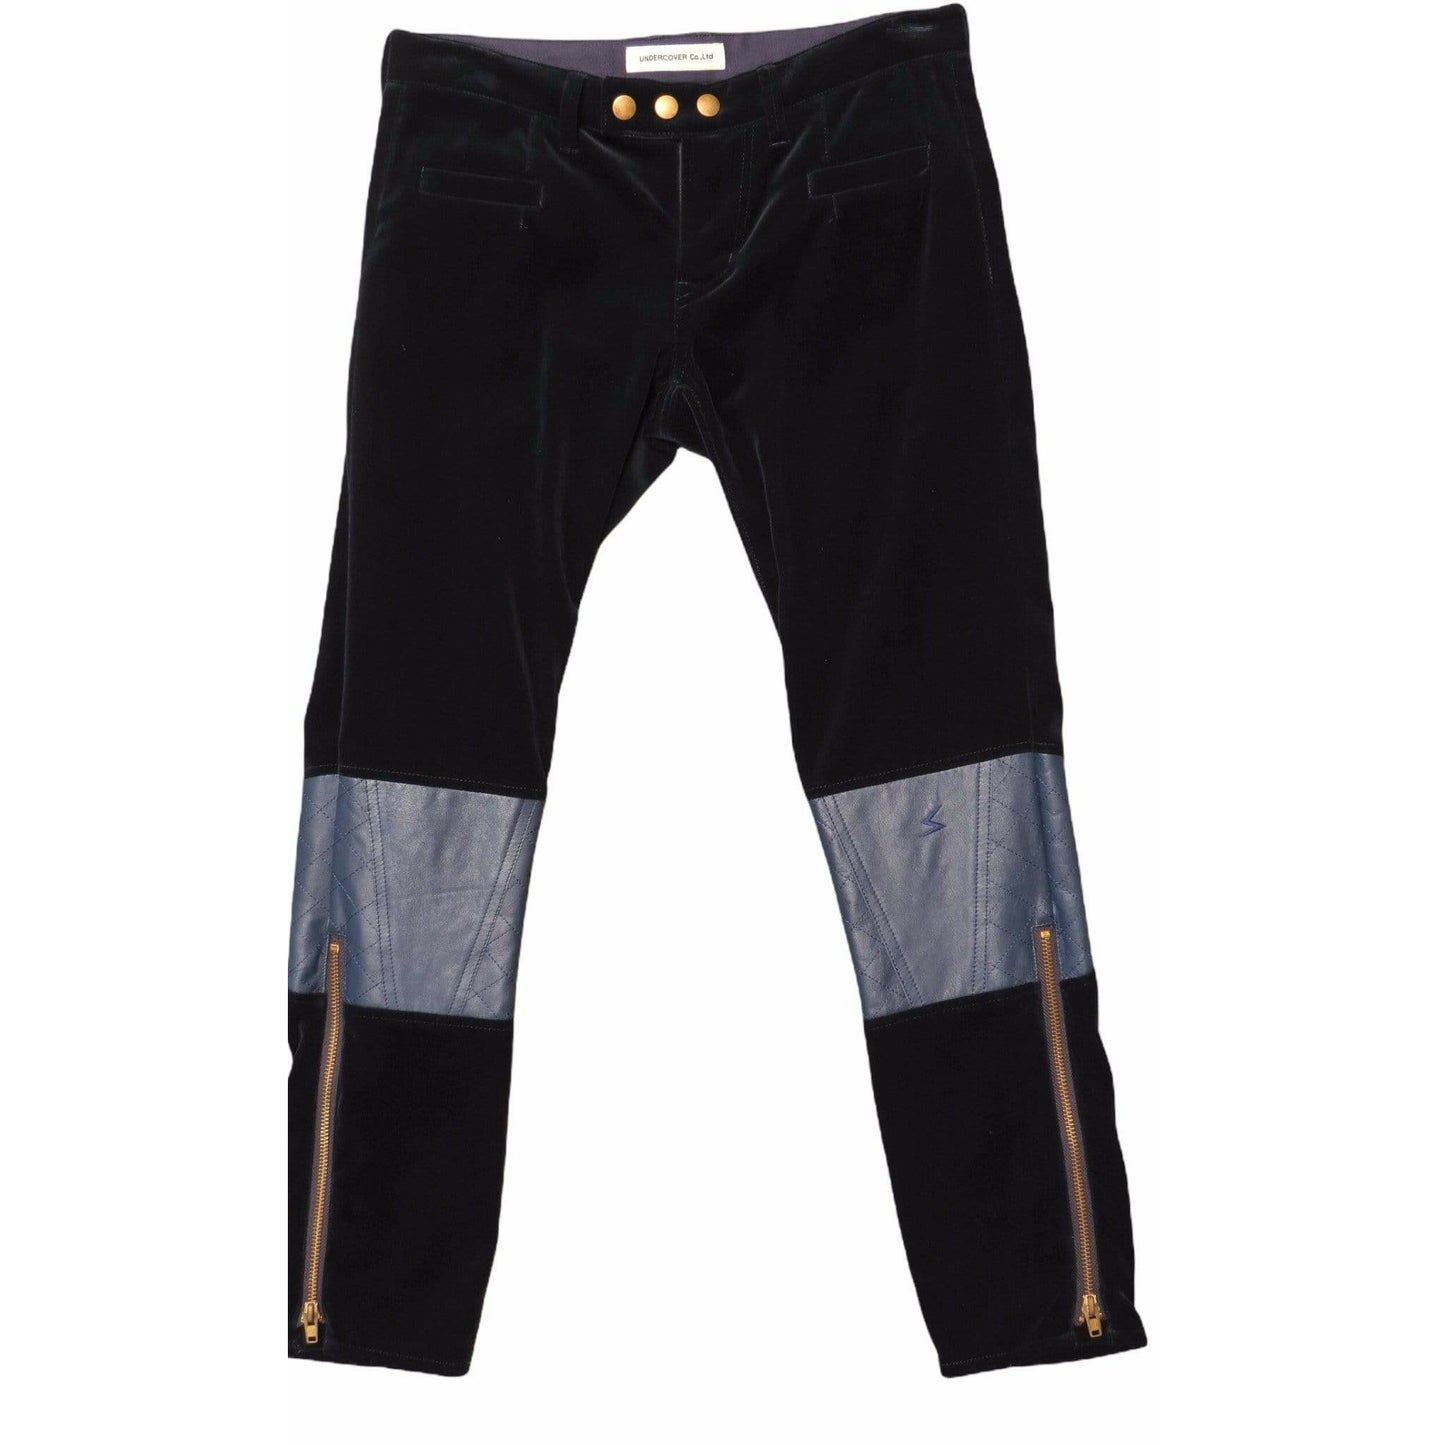 Pants undercover-straight-pant-1 Black